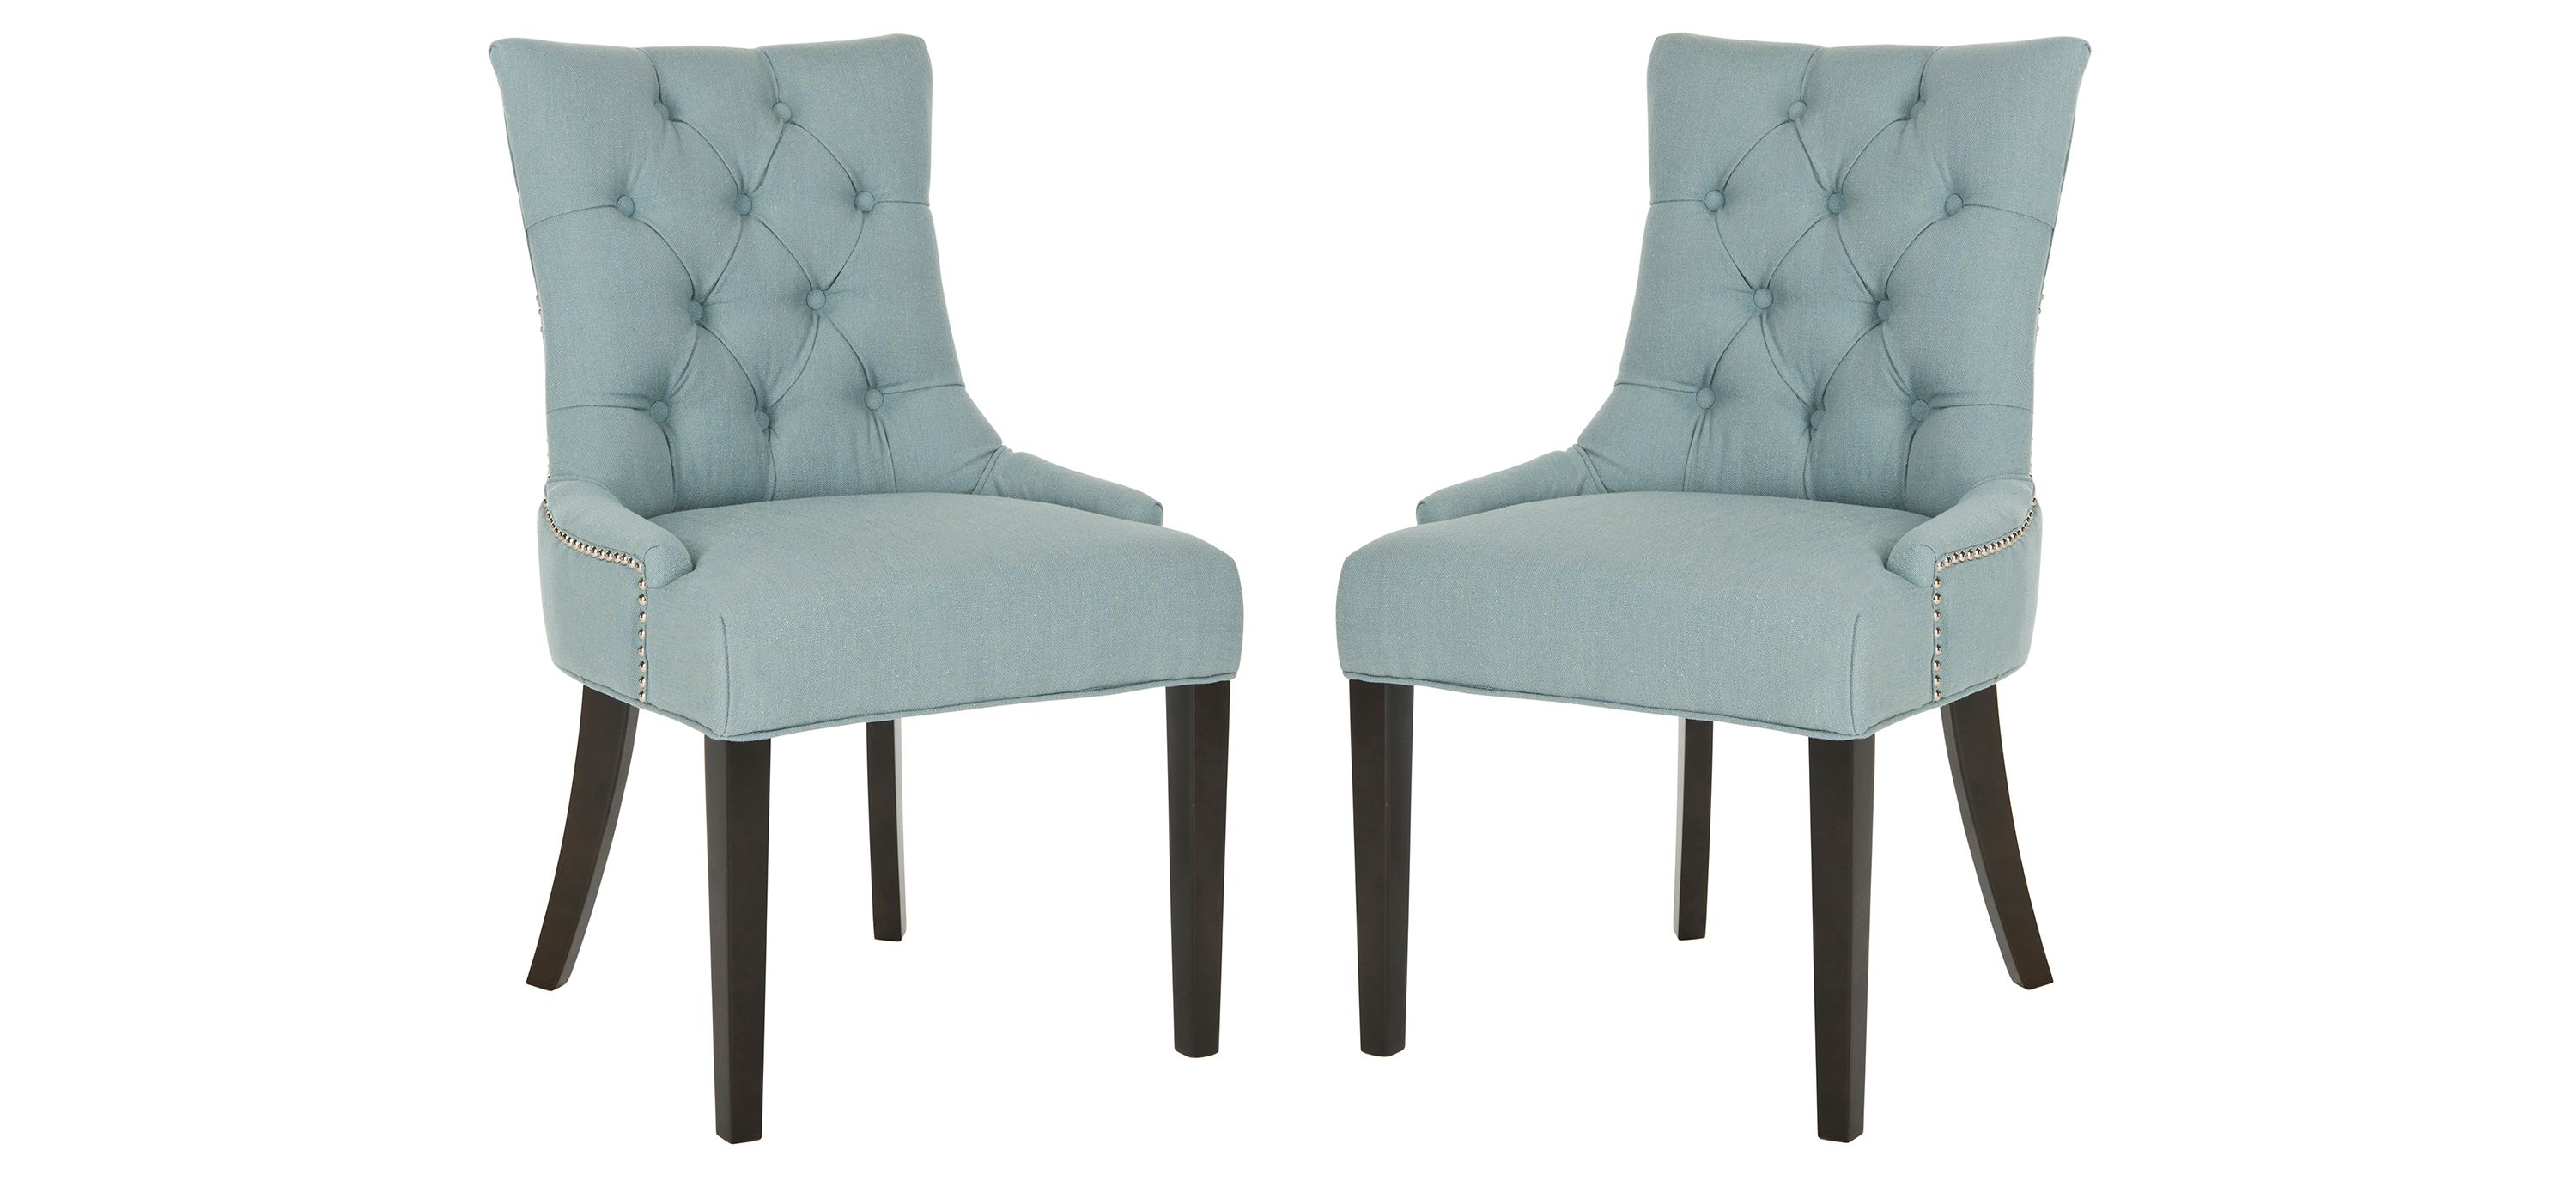 Abby Dining Chairs: Set of 2